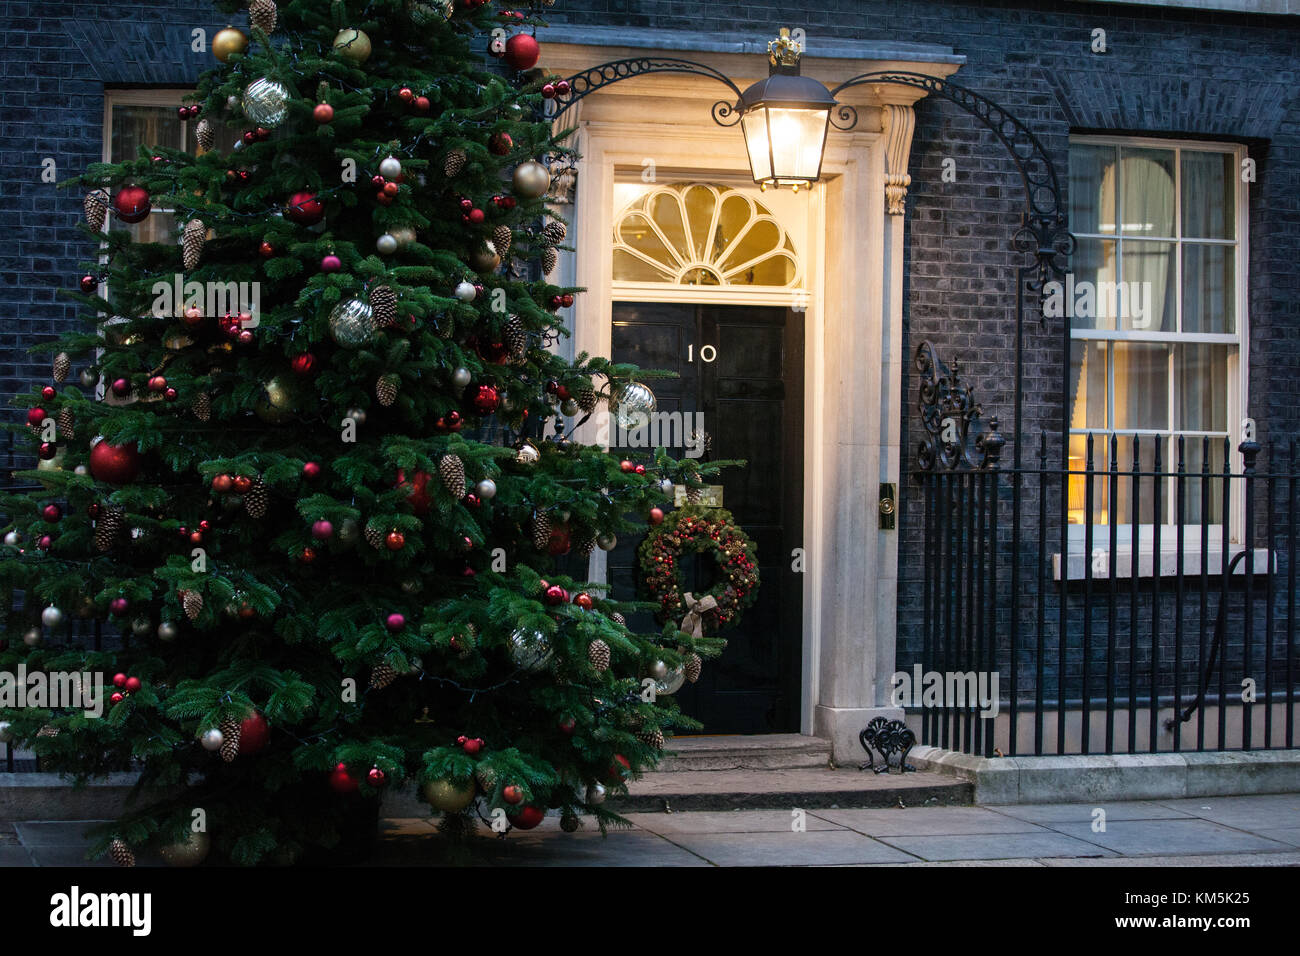 London, UK. 4th December, 2017. A traditional decorated Christmas tree and wreath outside the door of 10 Downing Street. Credit: Mark Kerrison/Alamy Live News Stock Photo